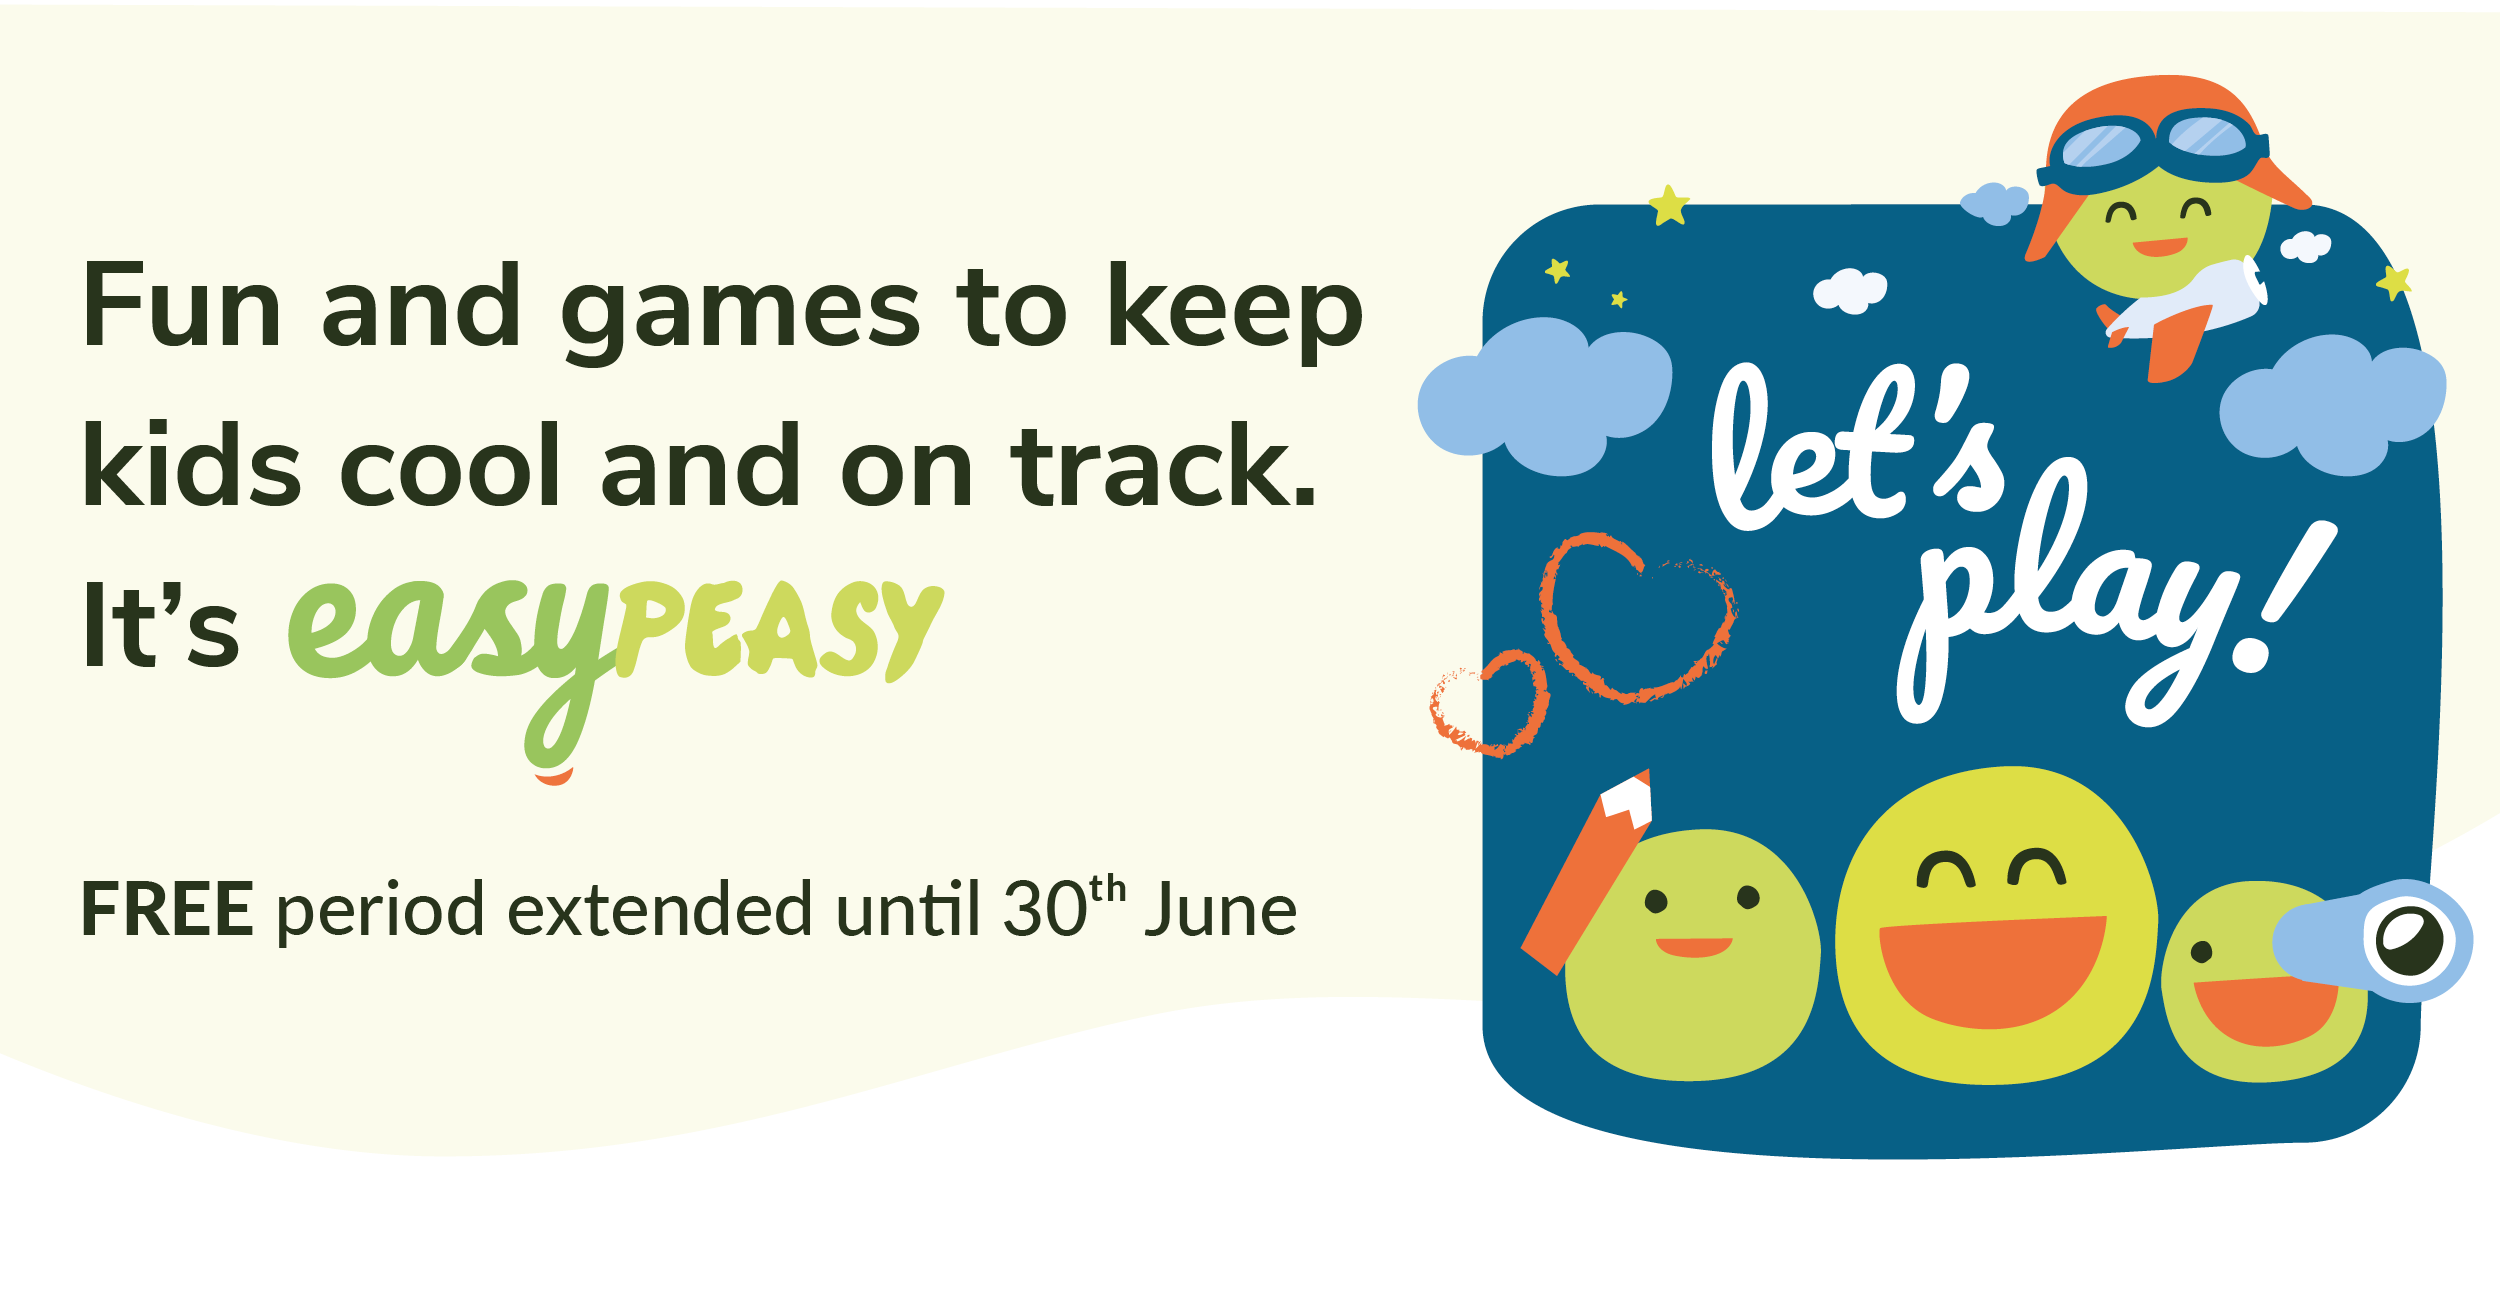 EasyPeasy peas illustration on a graphic promoting free parents and practitioners access up to 30th June 2020